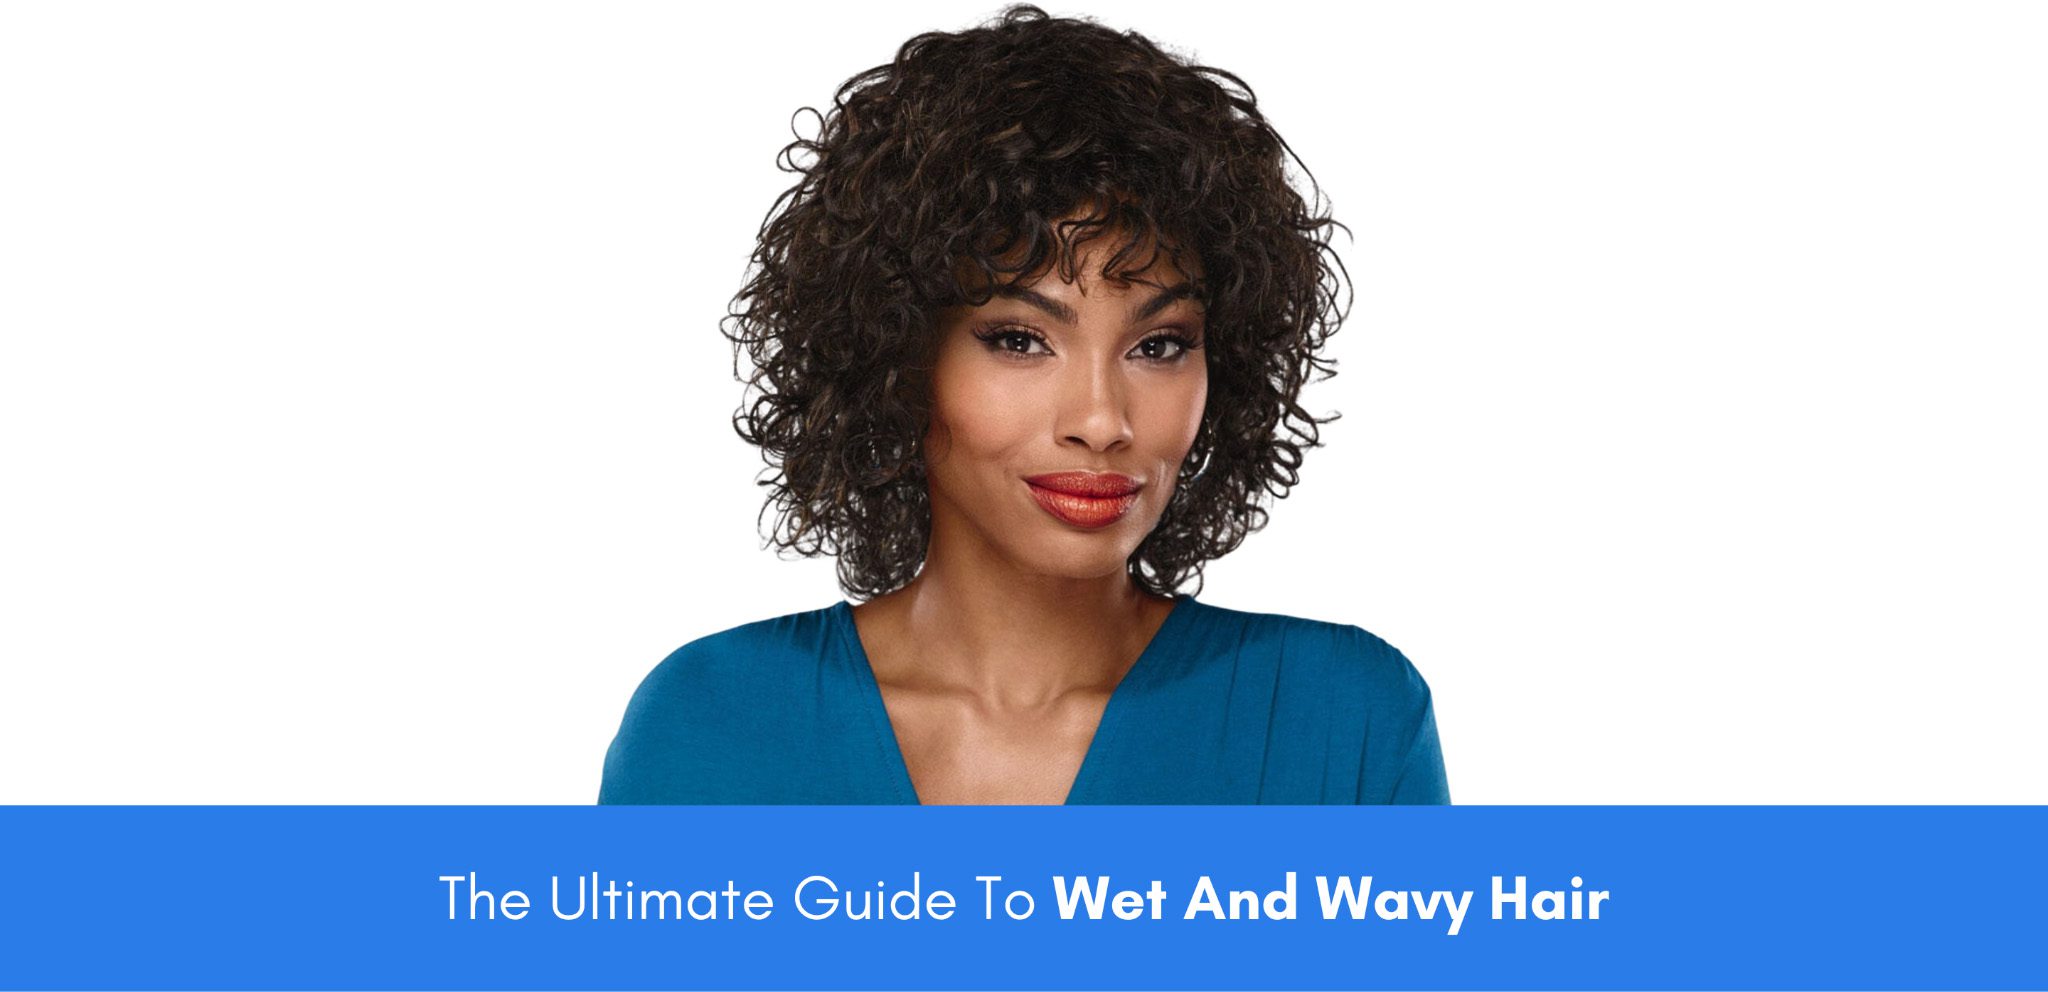 The Ultimate Guide To Wet And Wavy Hair